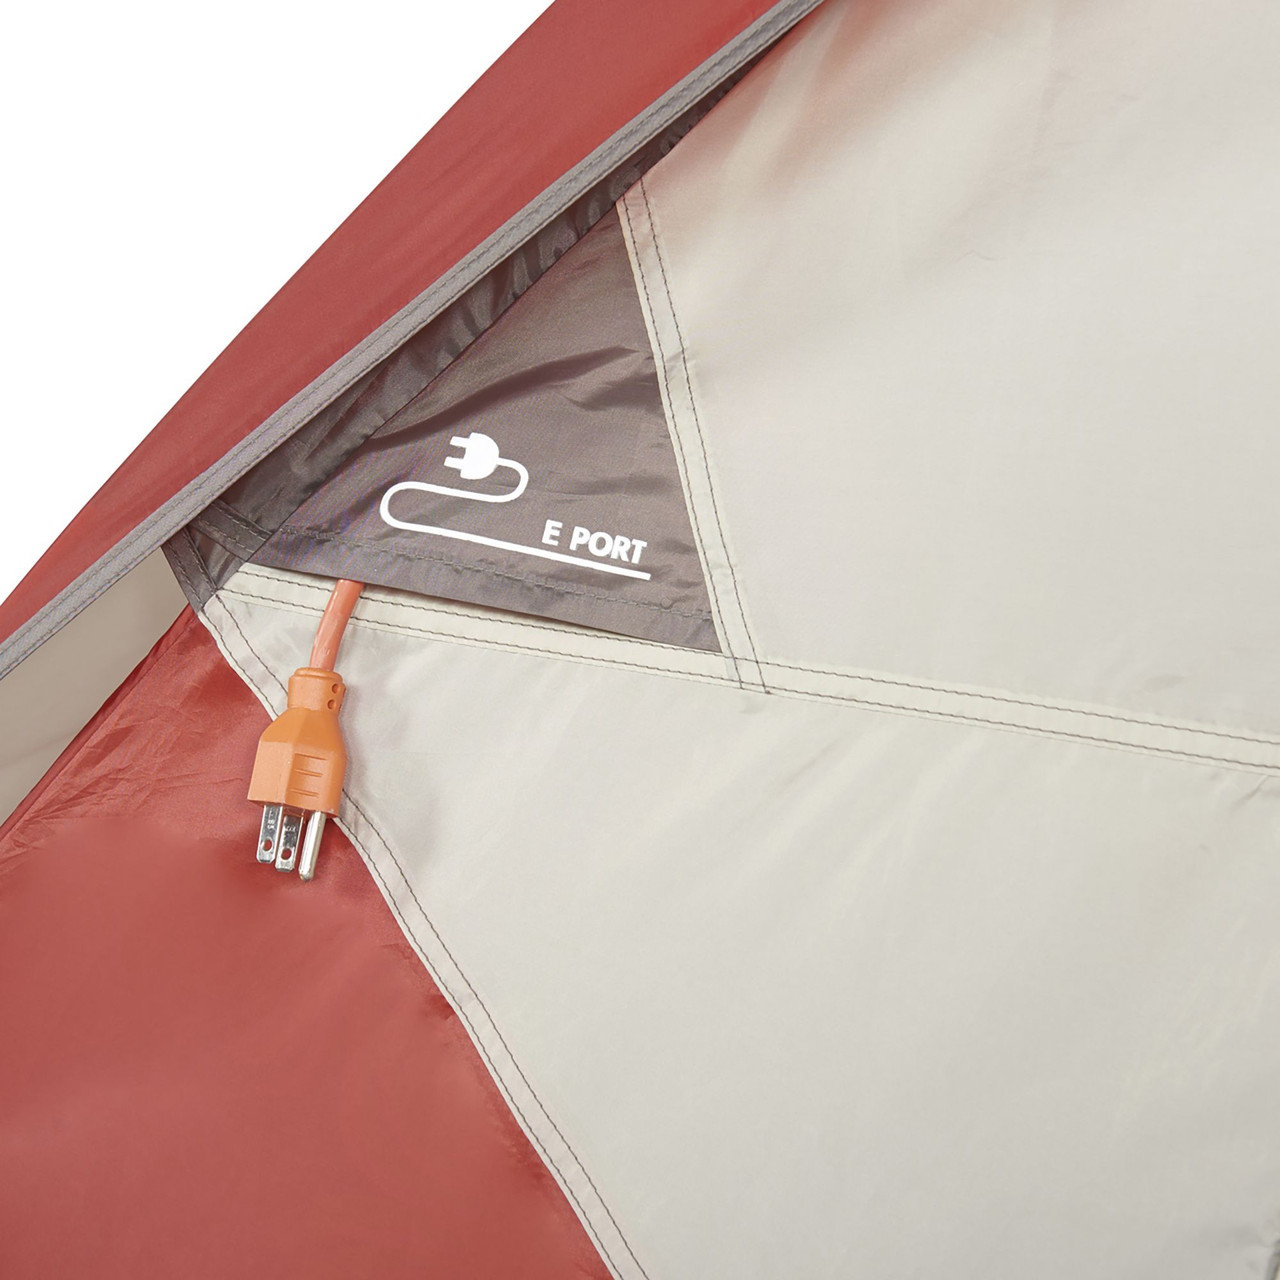 Torrey 2 Person Dome Tent